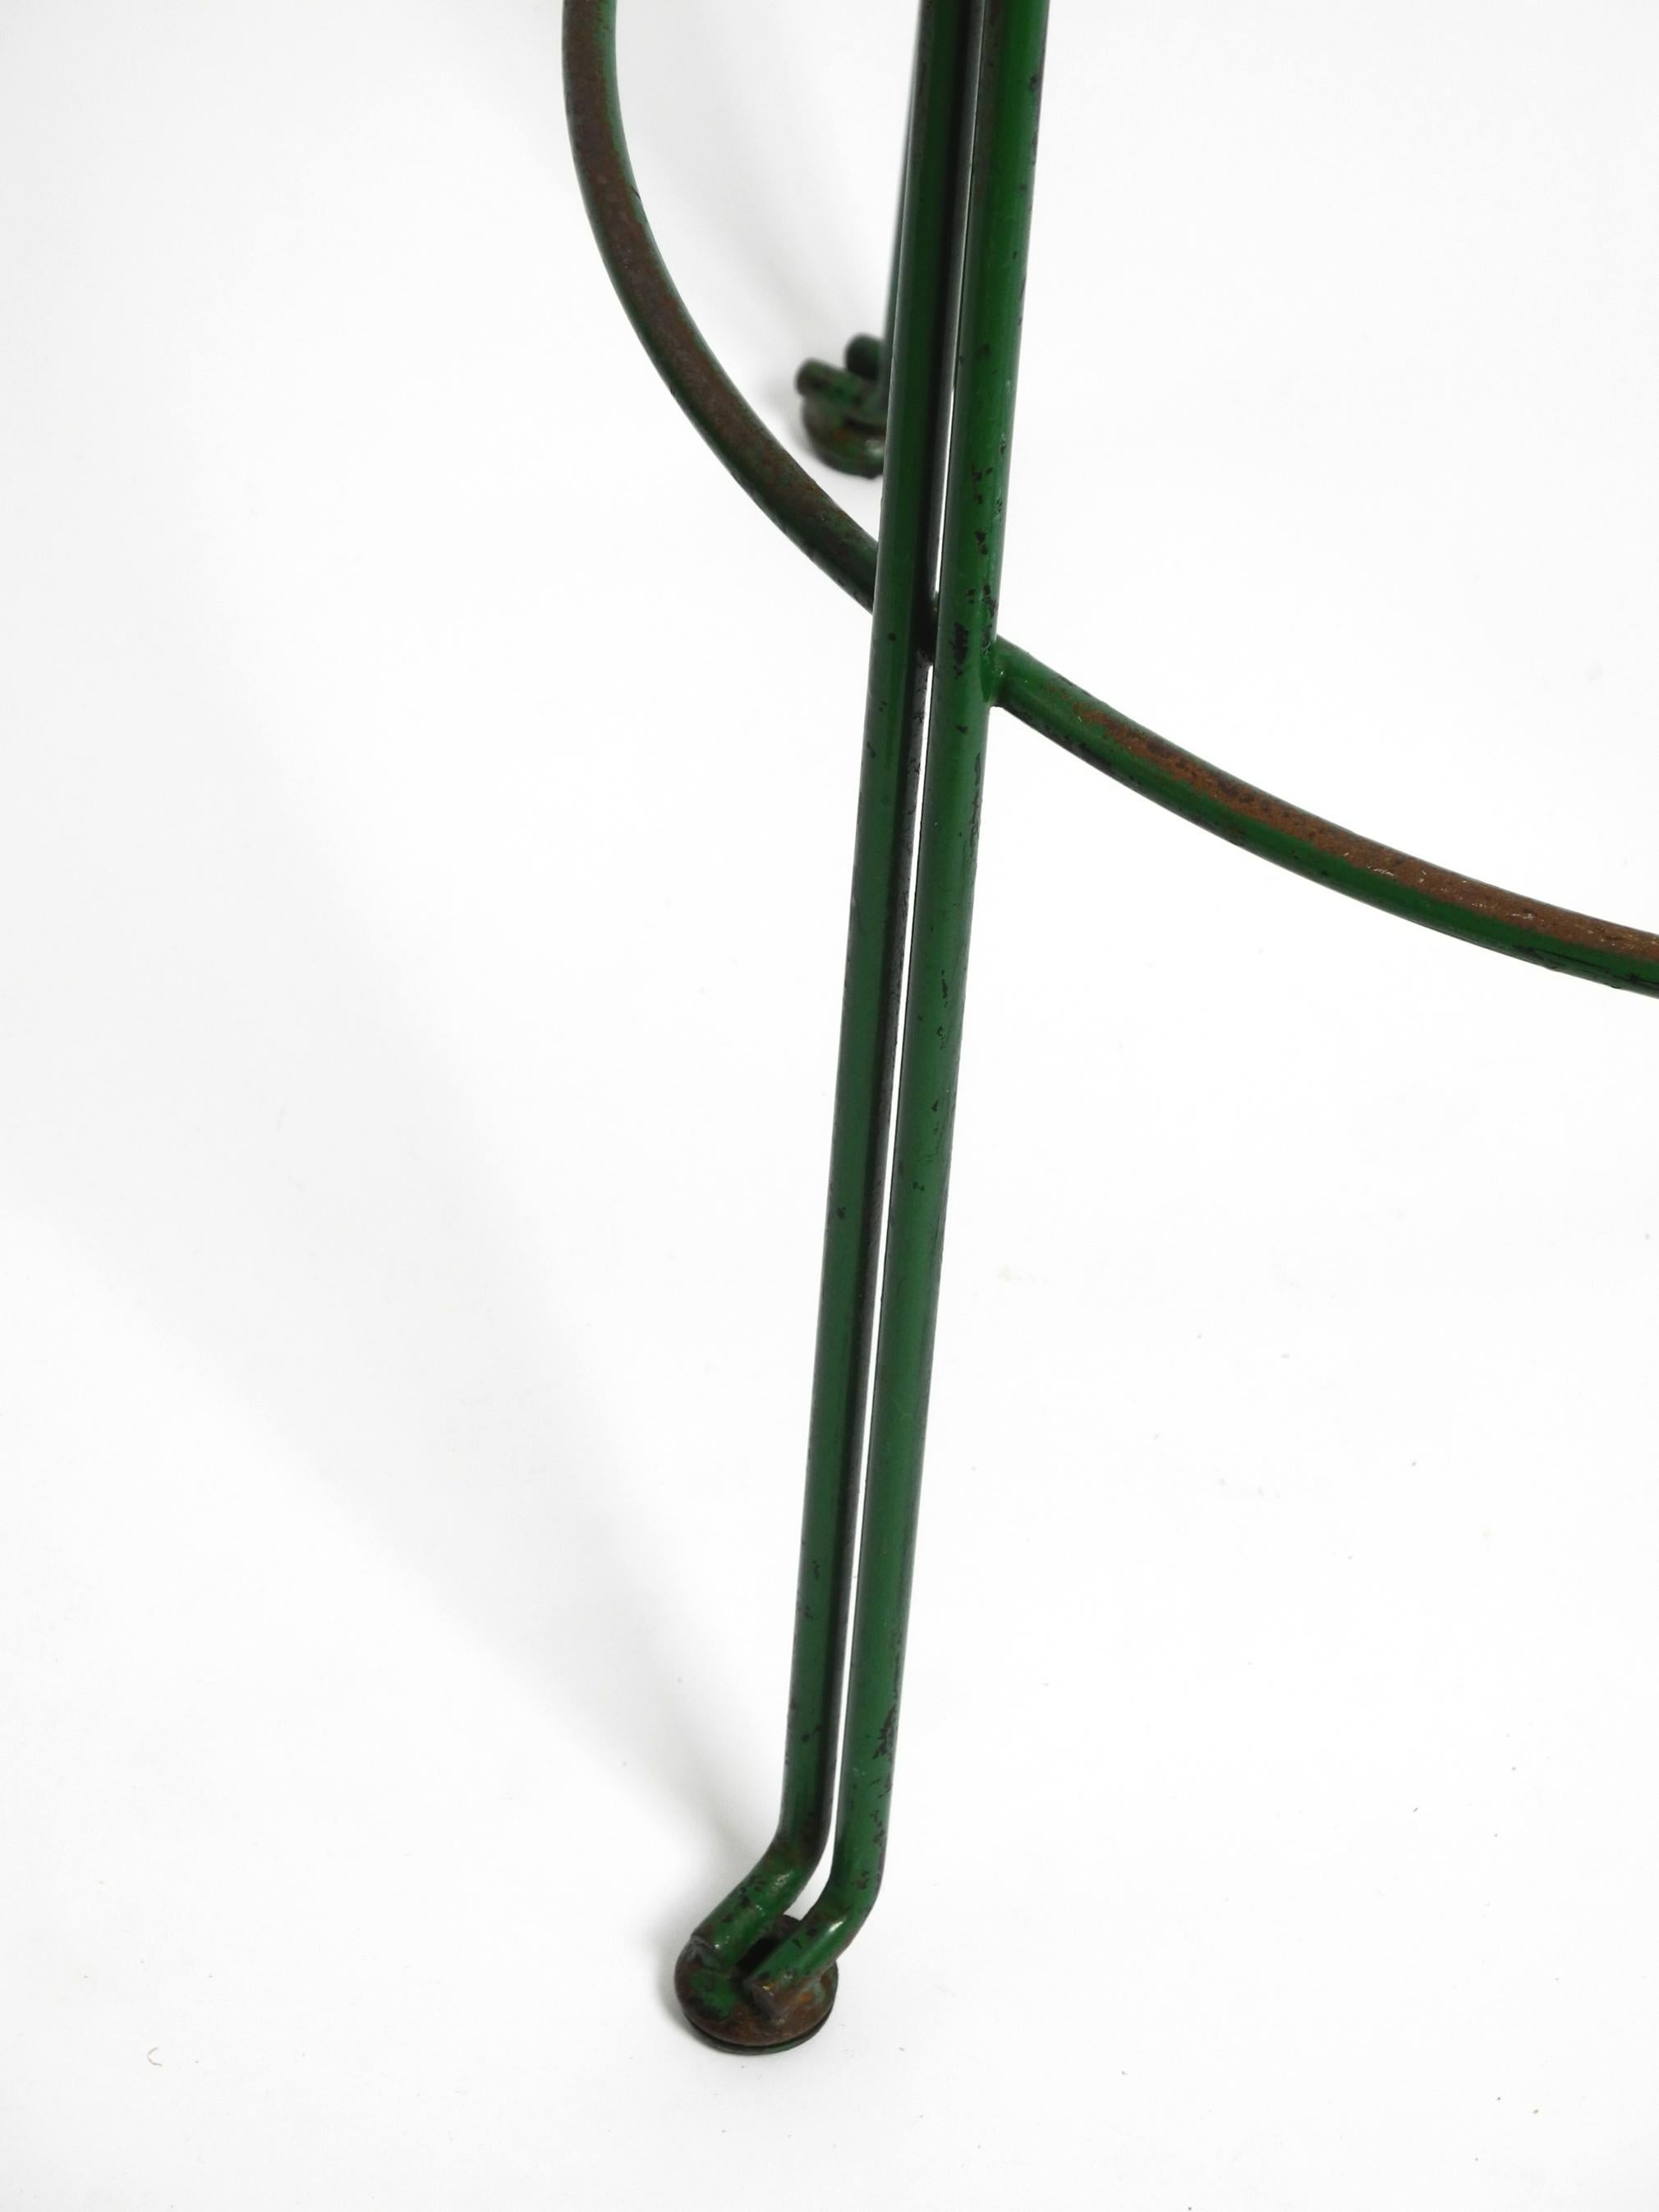 Italian 1960s bar stool made of green painted metal with perforated metal seat For Sale 5